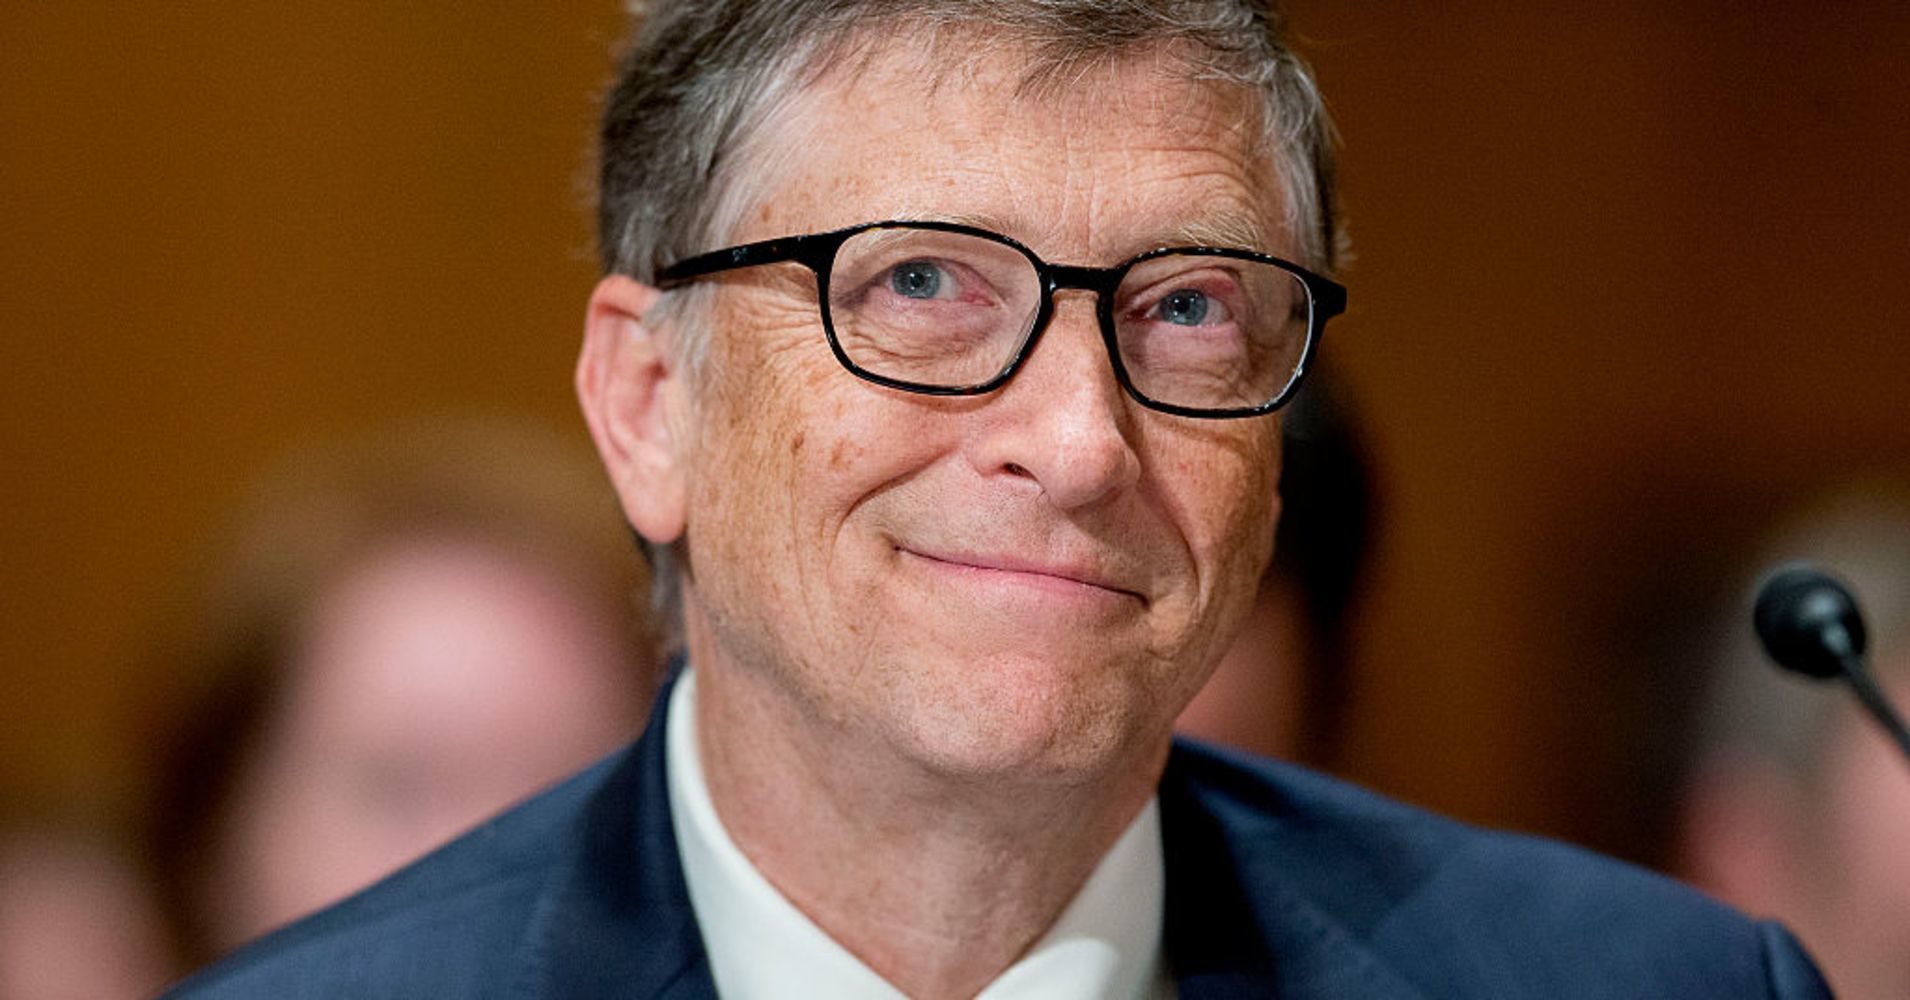 The billionaire philanthropist Bill Gates is backing a group of climate scientists lobbying for geoengineering experiments